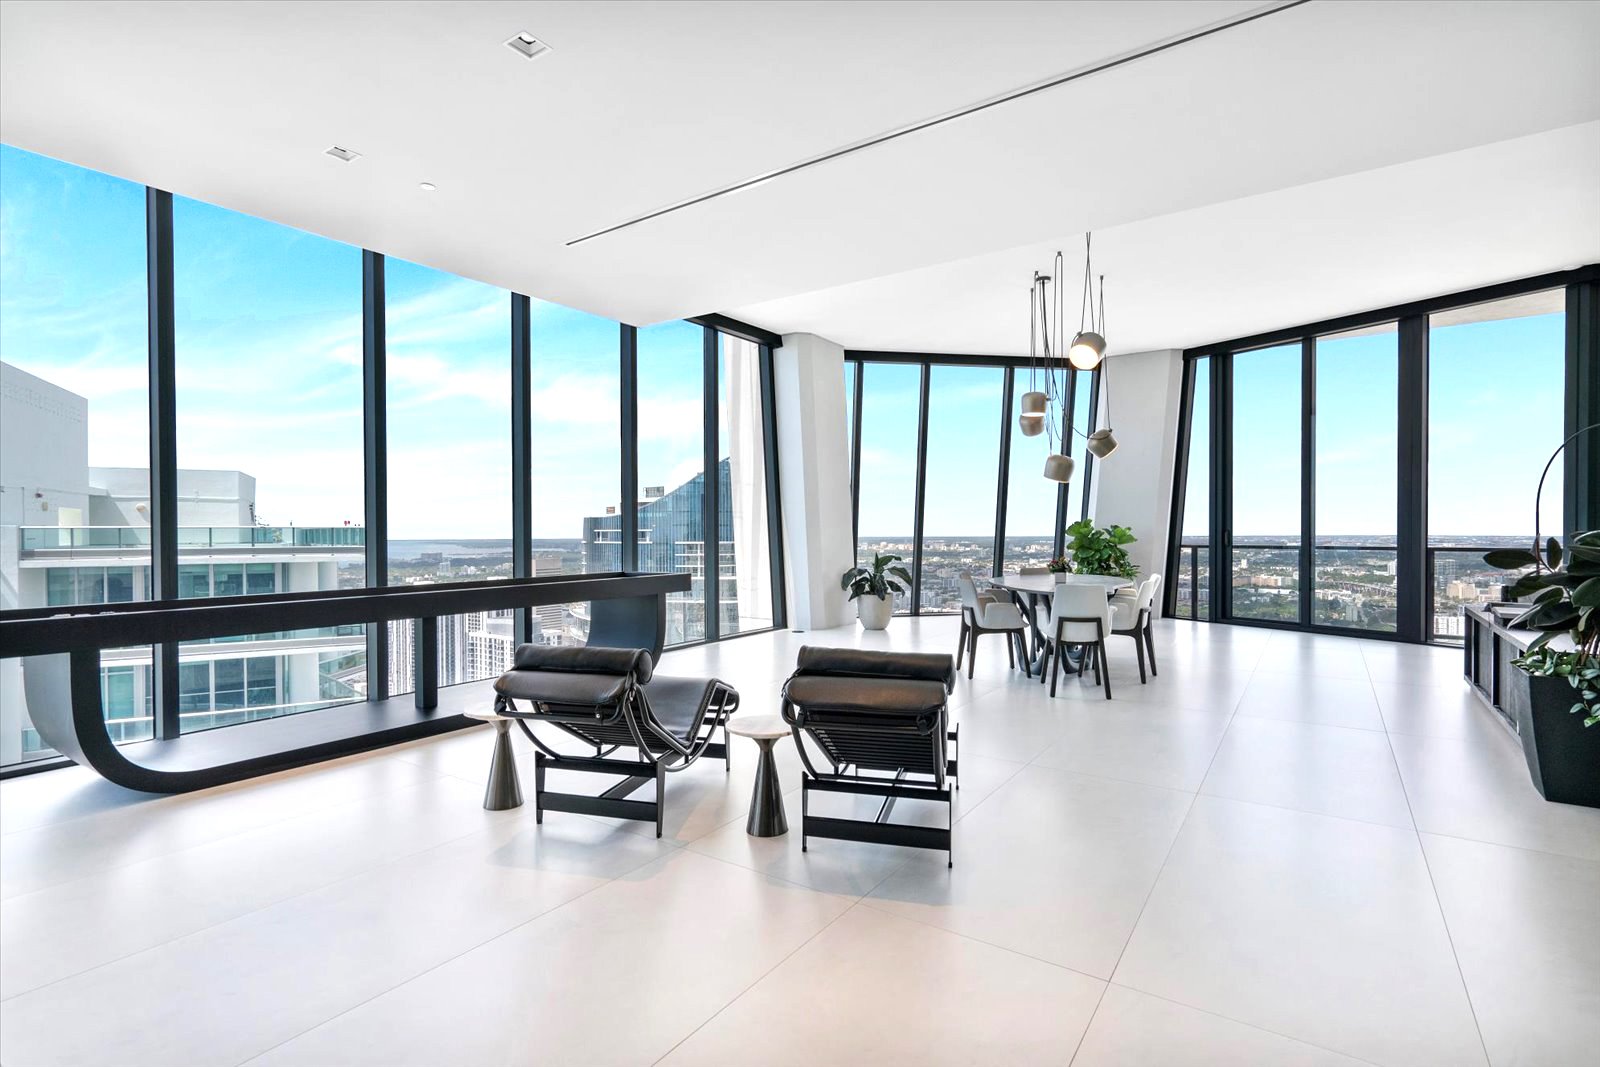 Step Inside A Full Floor Penthouse At The Zaha Hadid-Designed One Thousand Museum Asking $28 Million 17.jpg